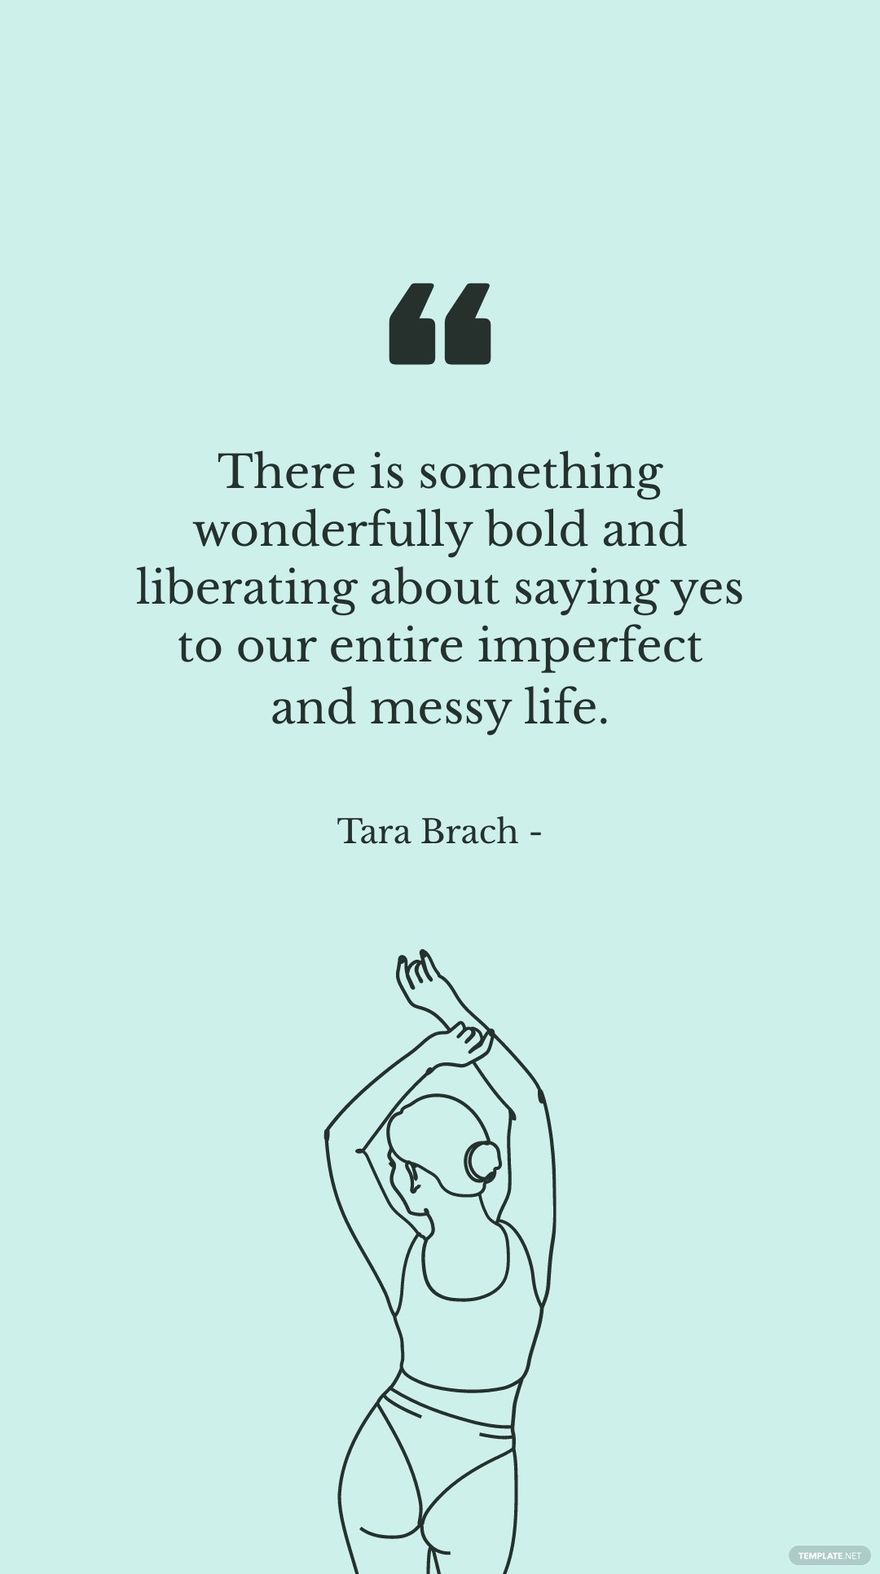 Tara Brach - There is something wonderfully bold and liberating about saying yes to our entire imperfect and messy life. in JPG